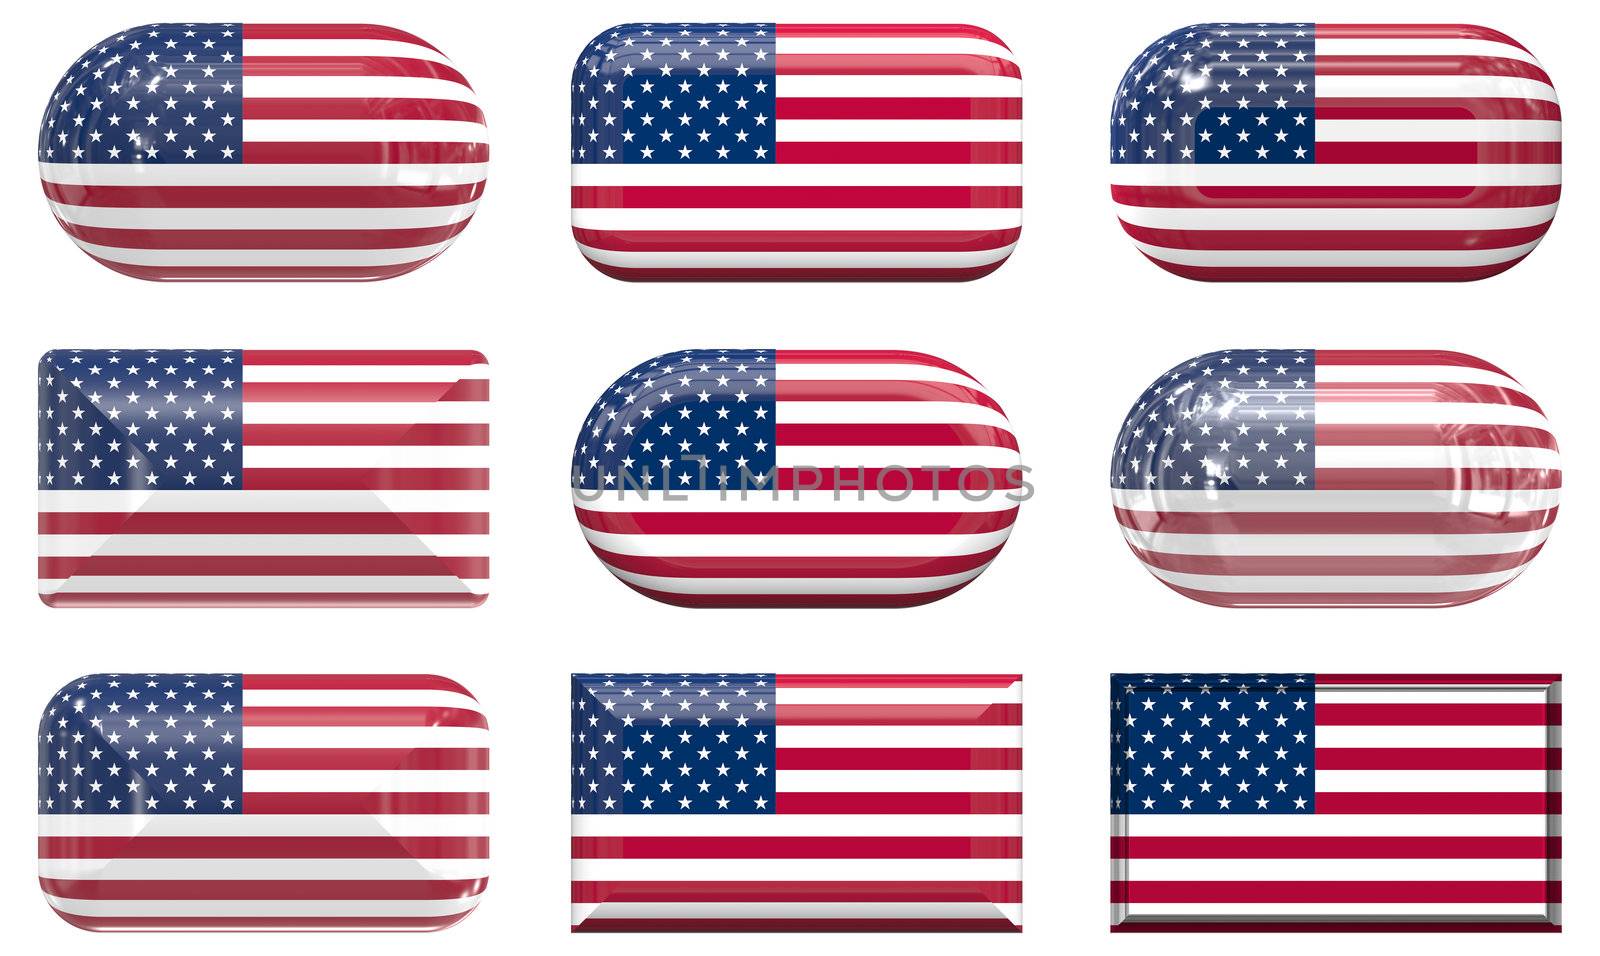 nine glass buttons of the  Flag of the United States